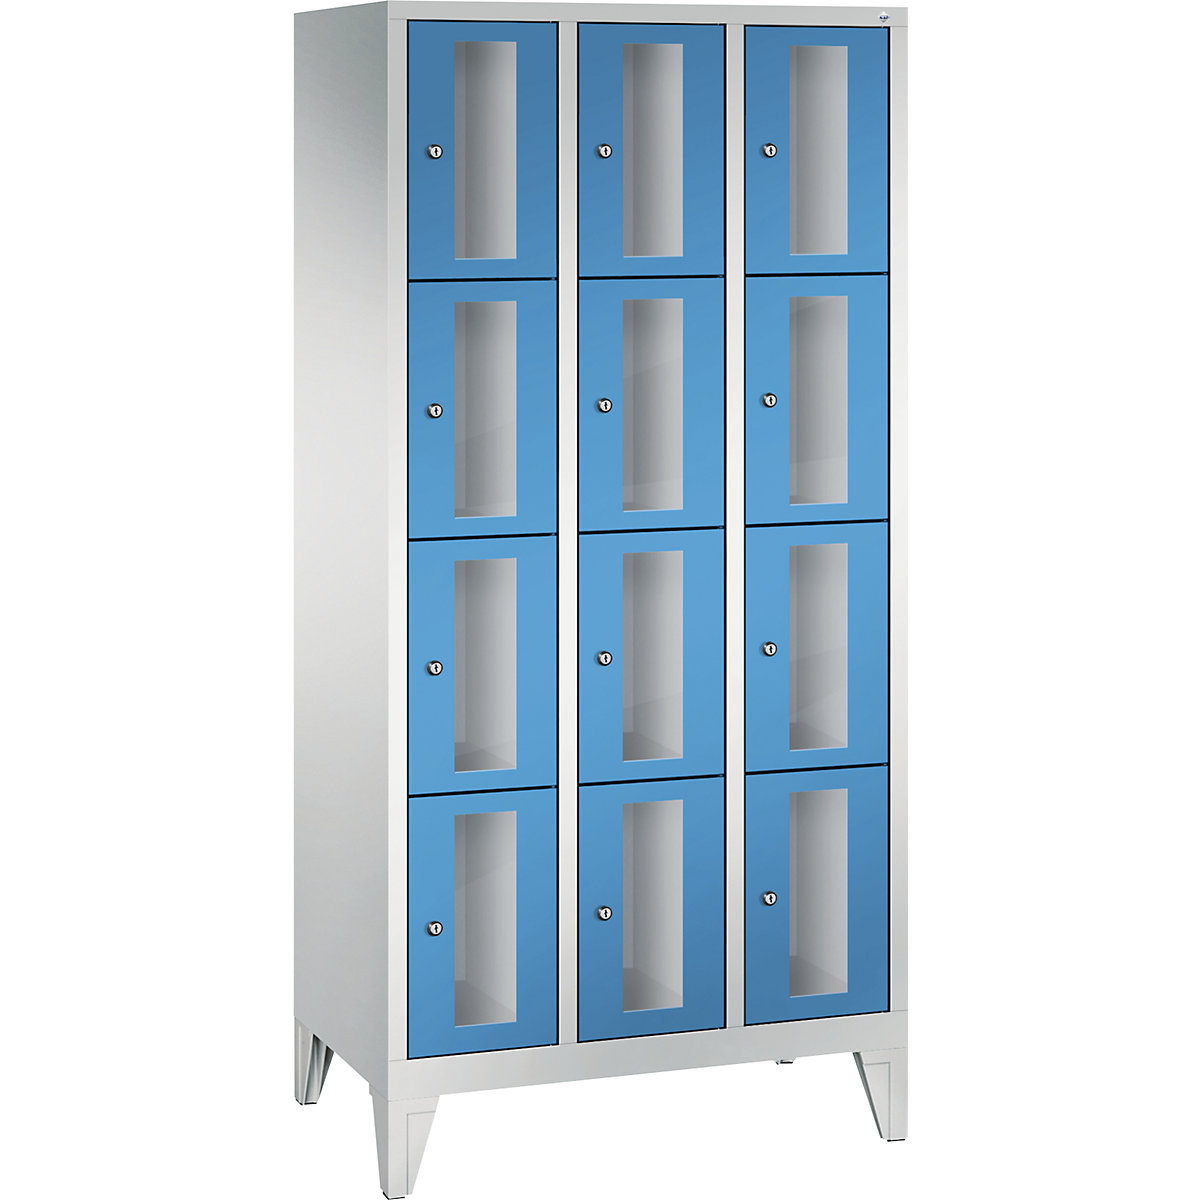 C+P – CLASSIC locker unit, compartment height 375 mm, with feet, 12 compartments, width 900 mm, light blue door